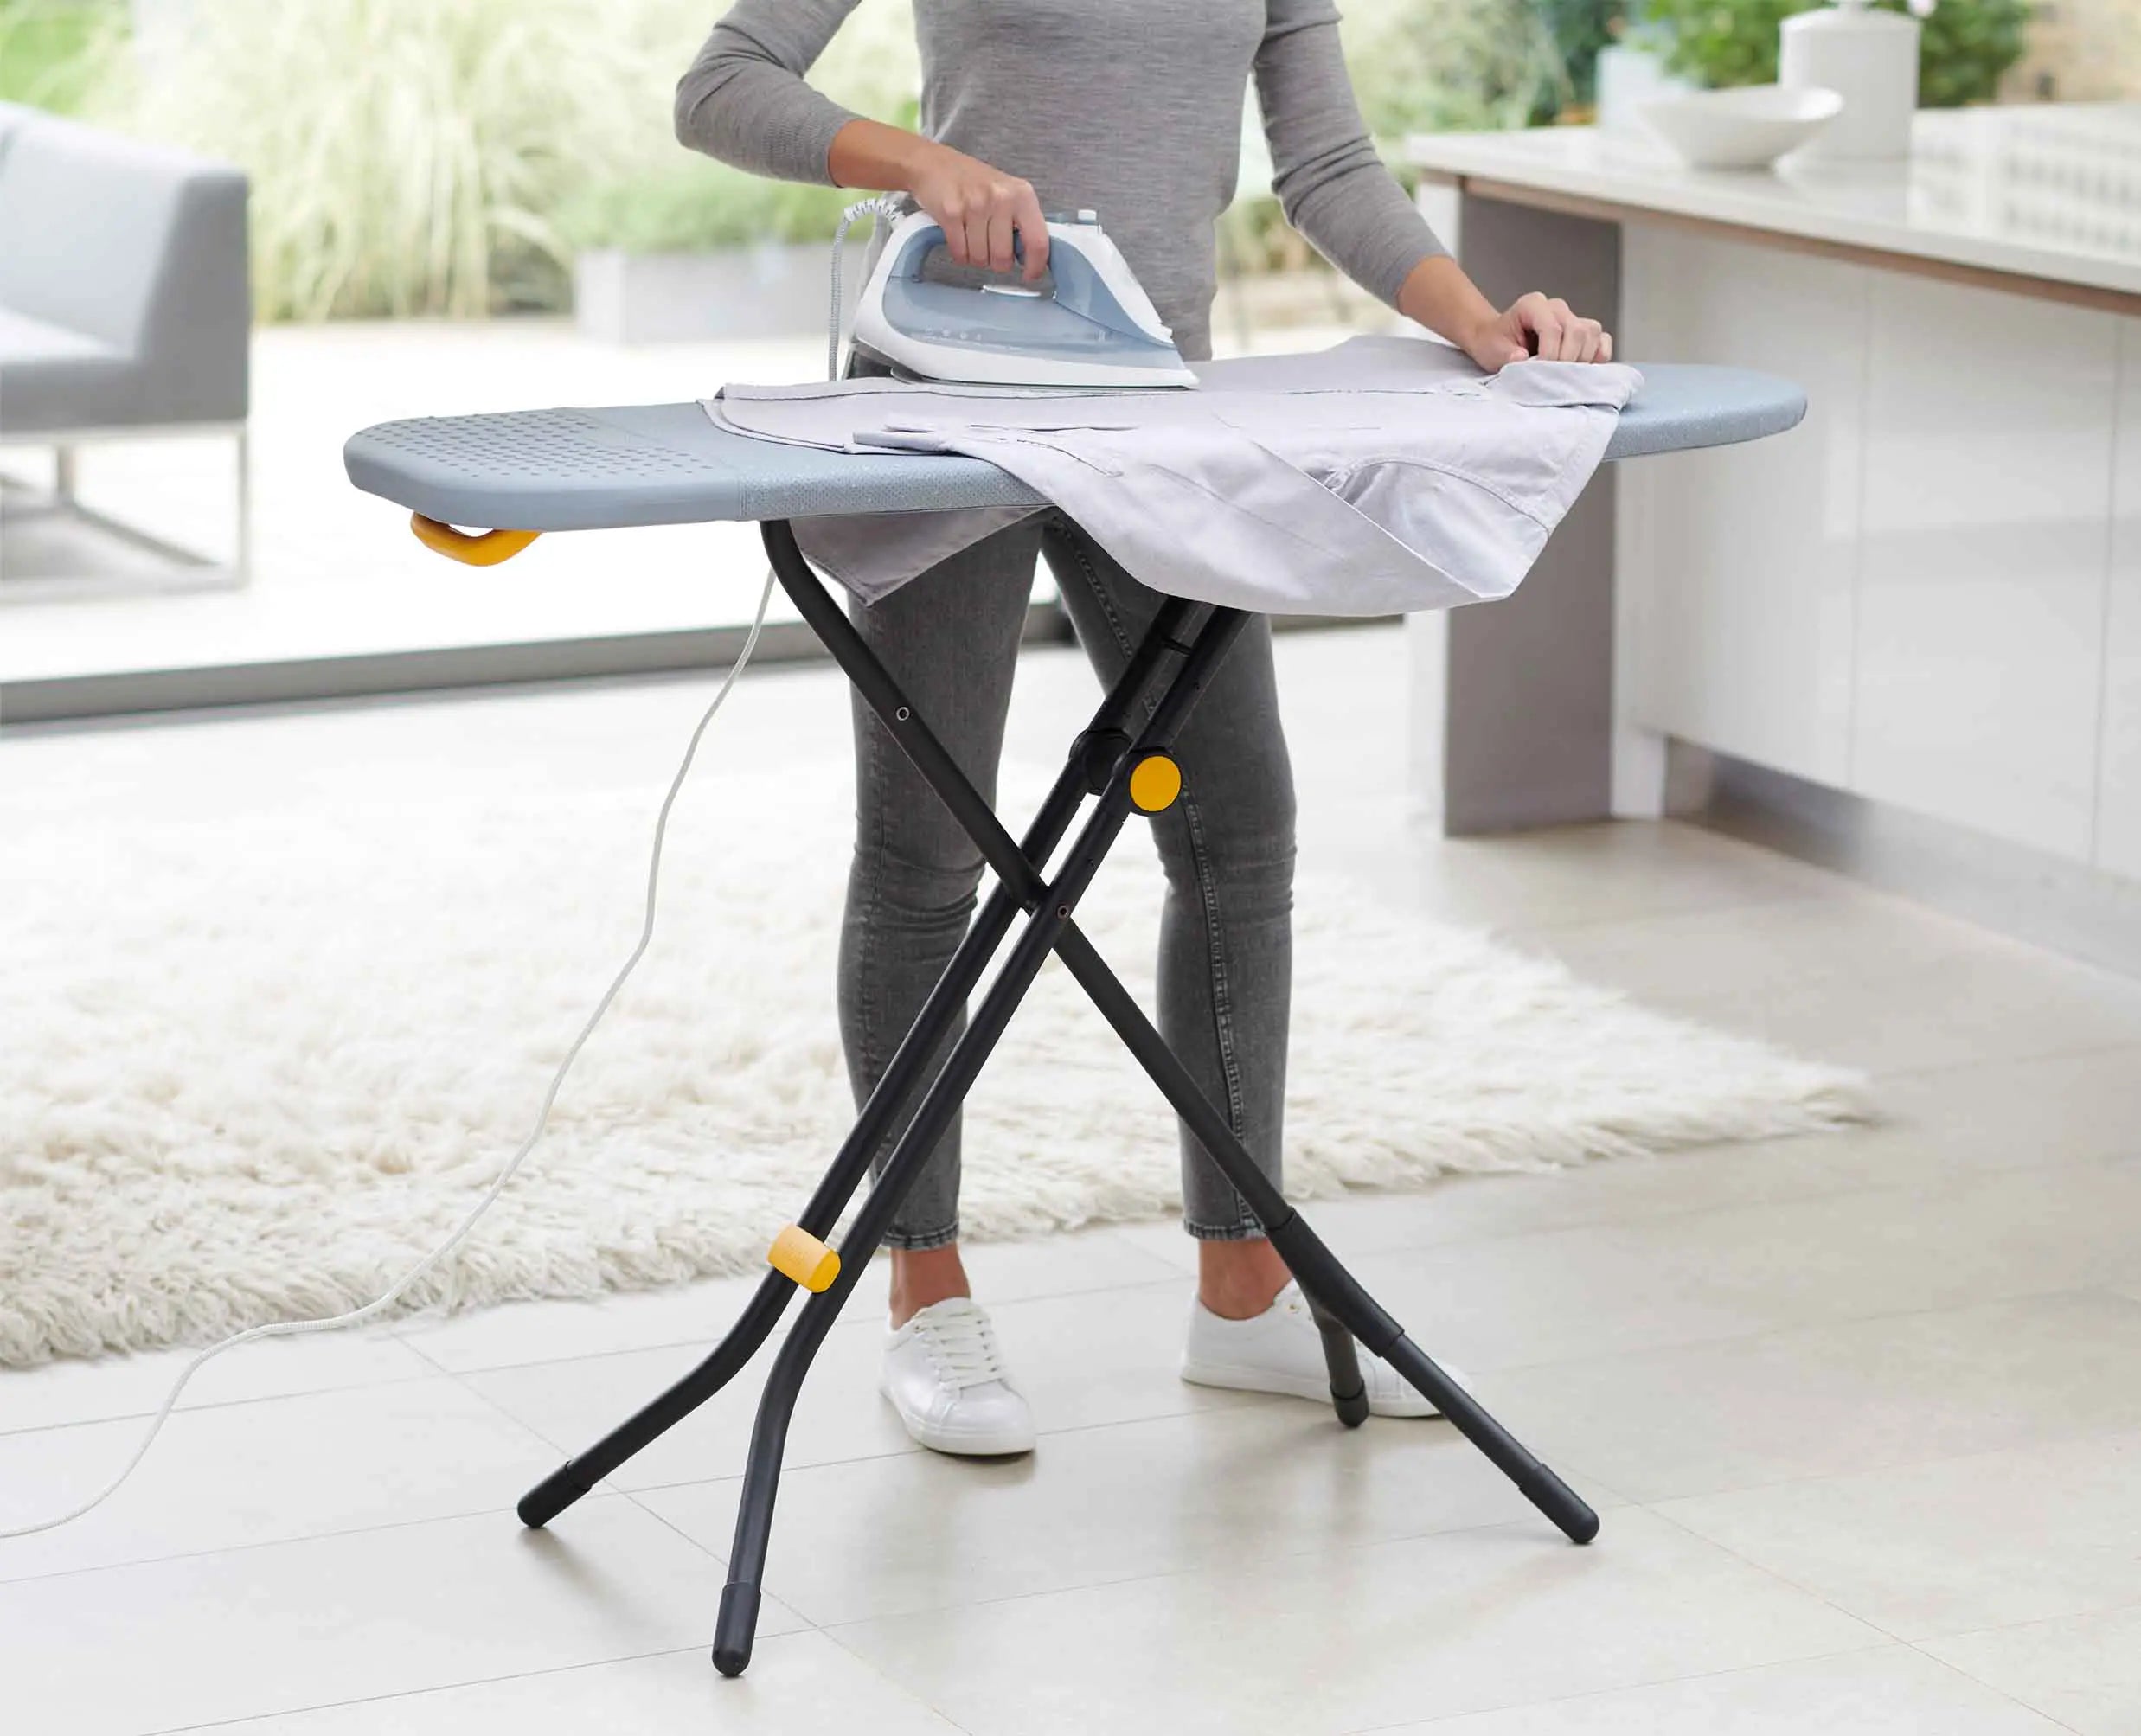 Glide Easy-store Ironing Board - 50005 - Image 3